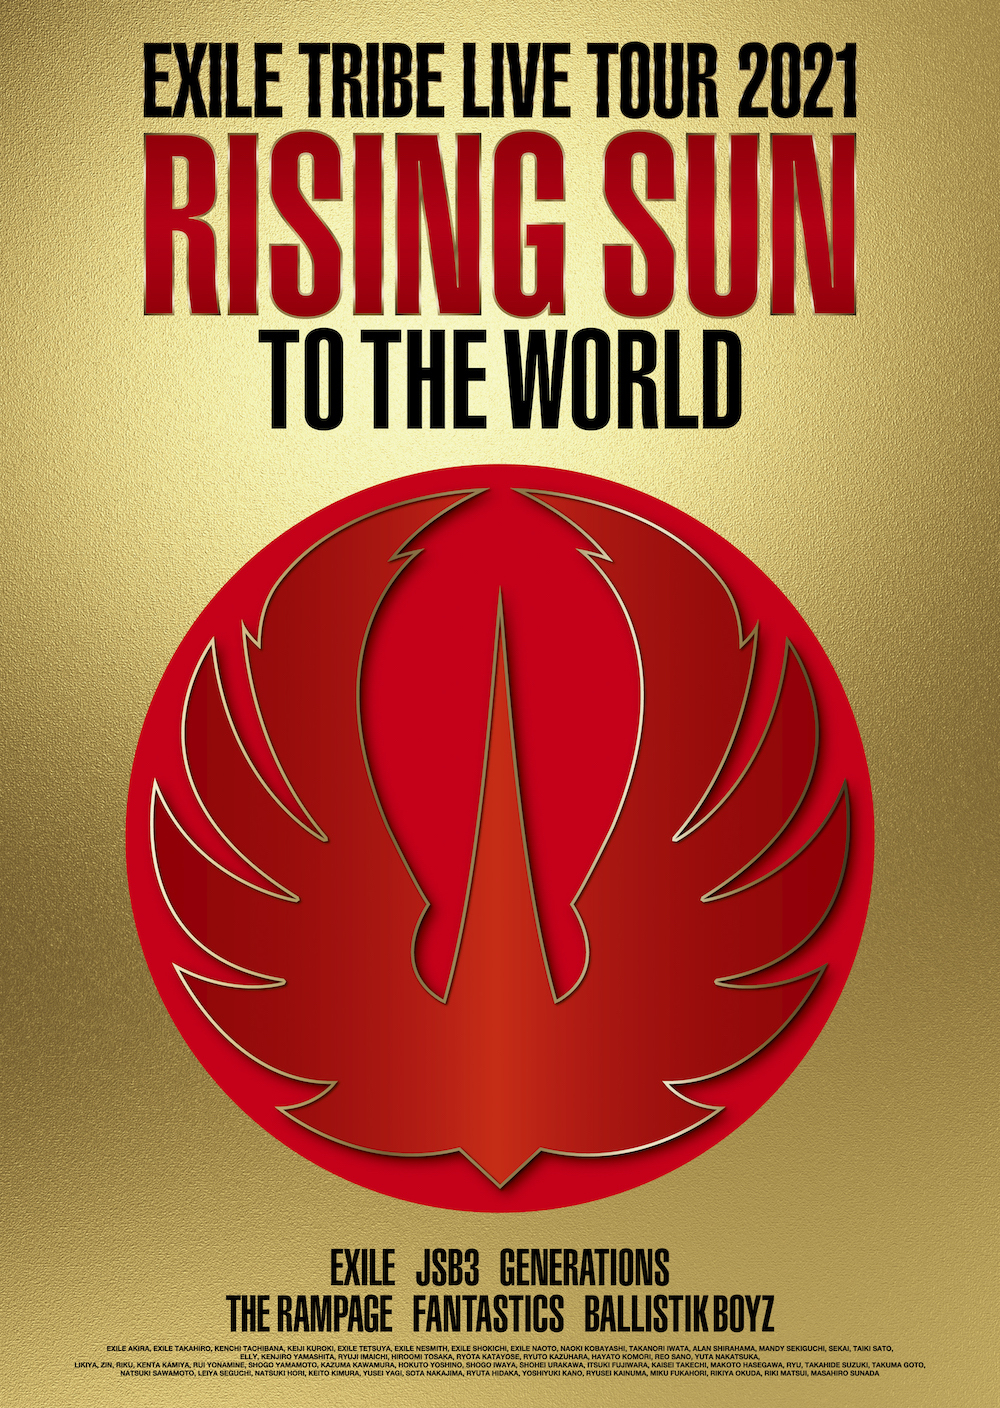 『EXILE TRIBE LIVE TOUR 2021 "RISING SUN TO THE WORLD"』